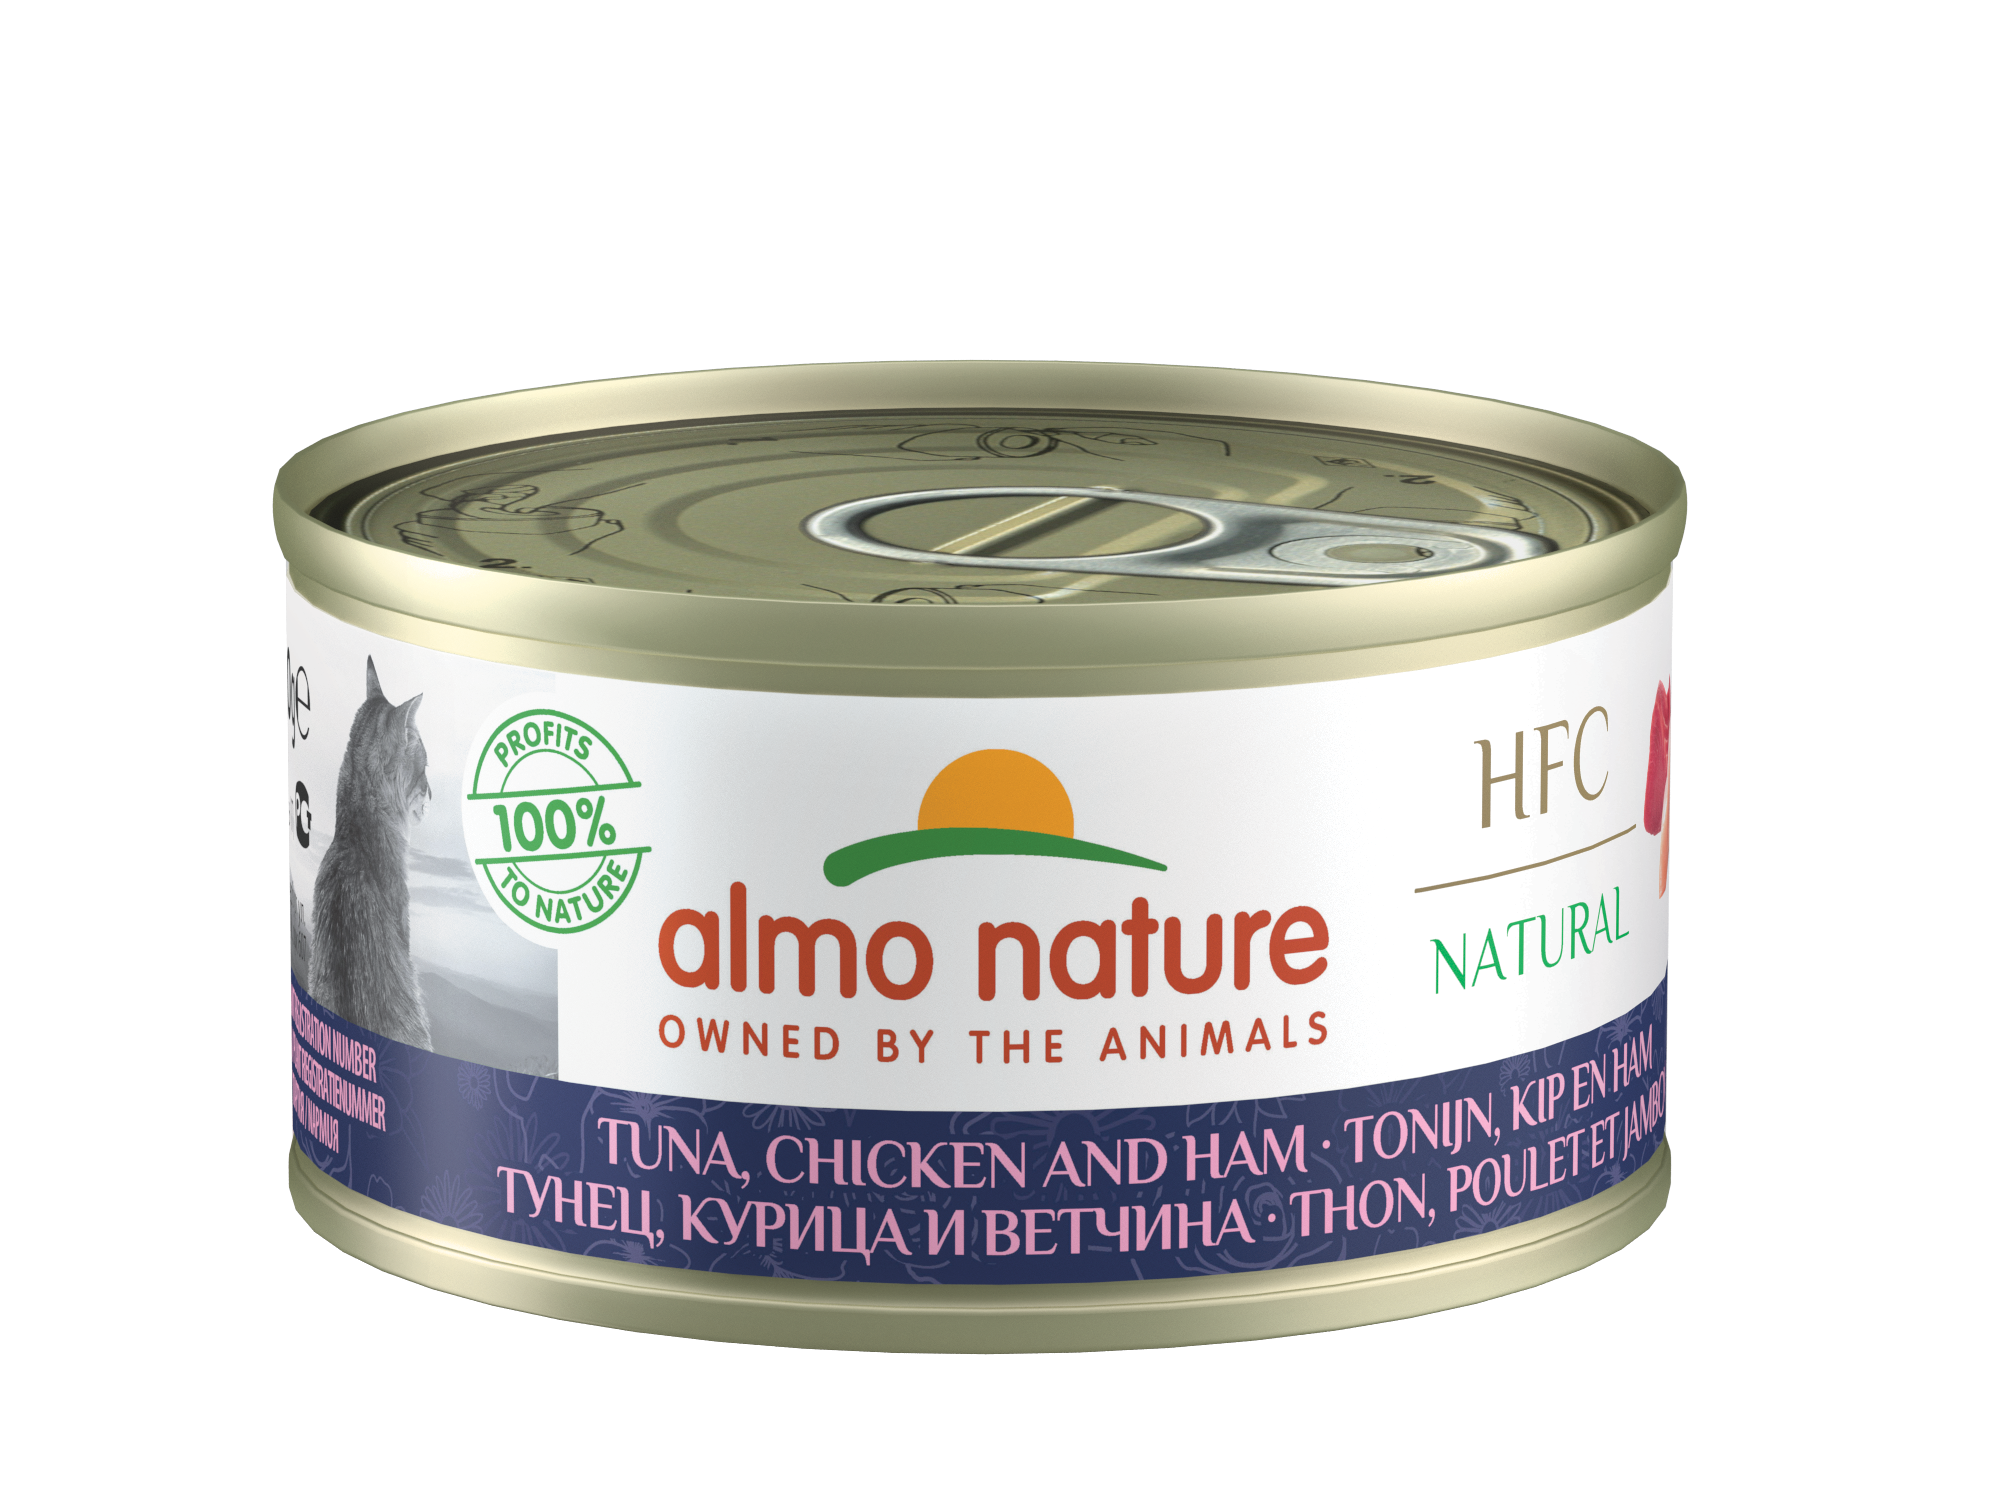 Almo Nature - HFC Natural Tuna, Chicken and Ham 70g for Cats